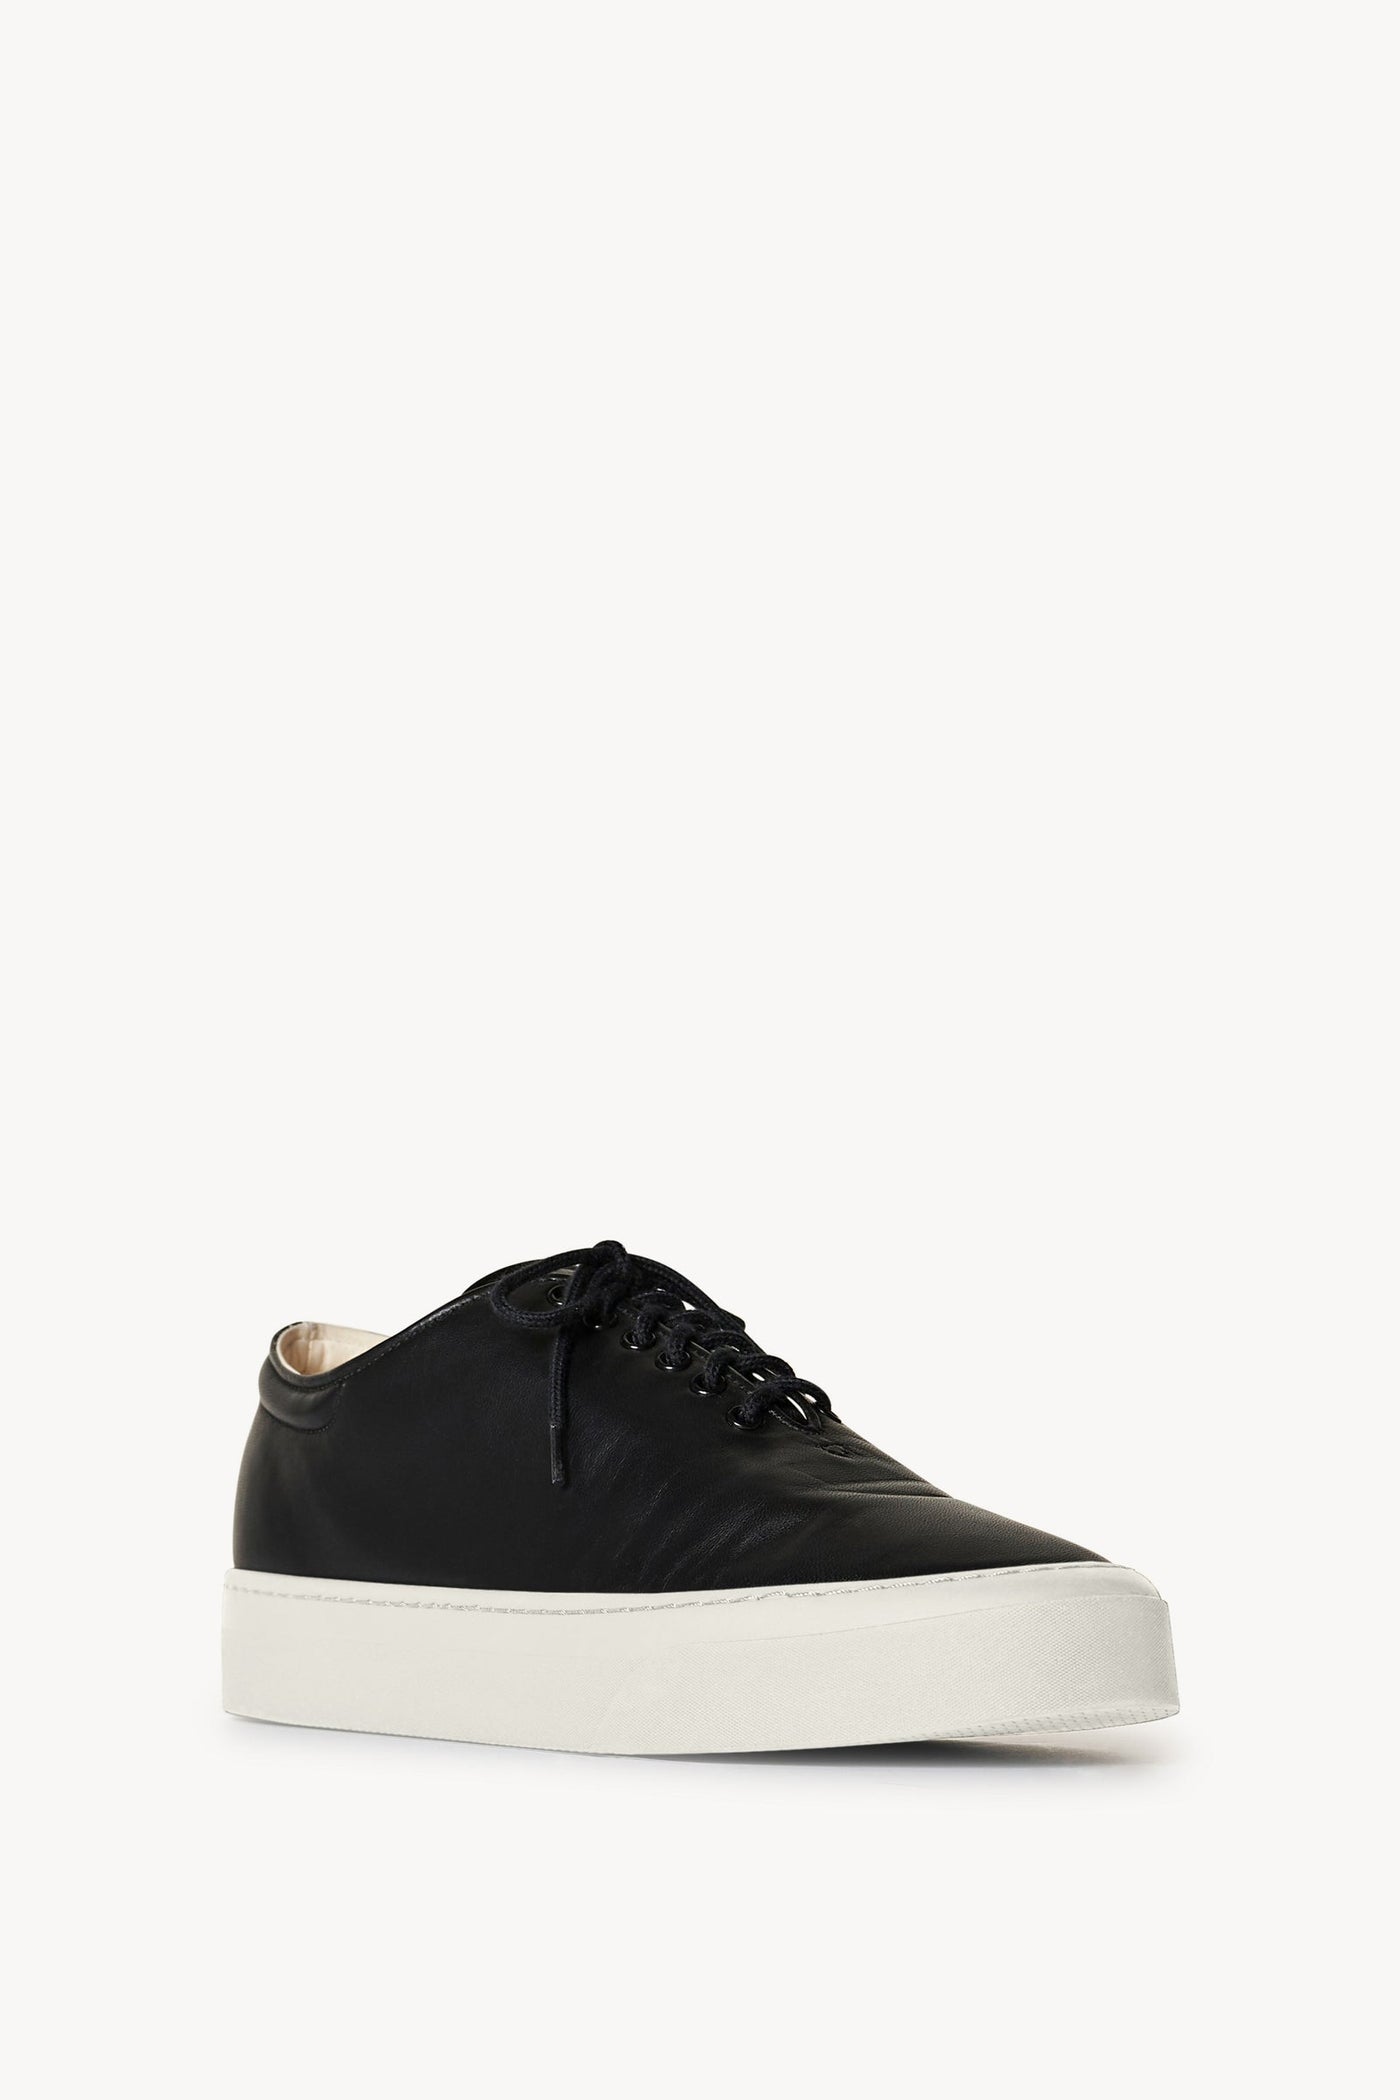 the-row-marie-h-lace-up-sneaker-black-amarees